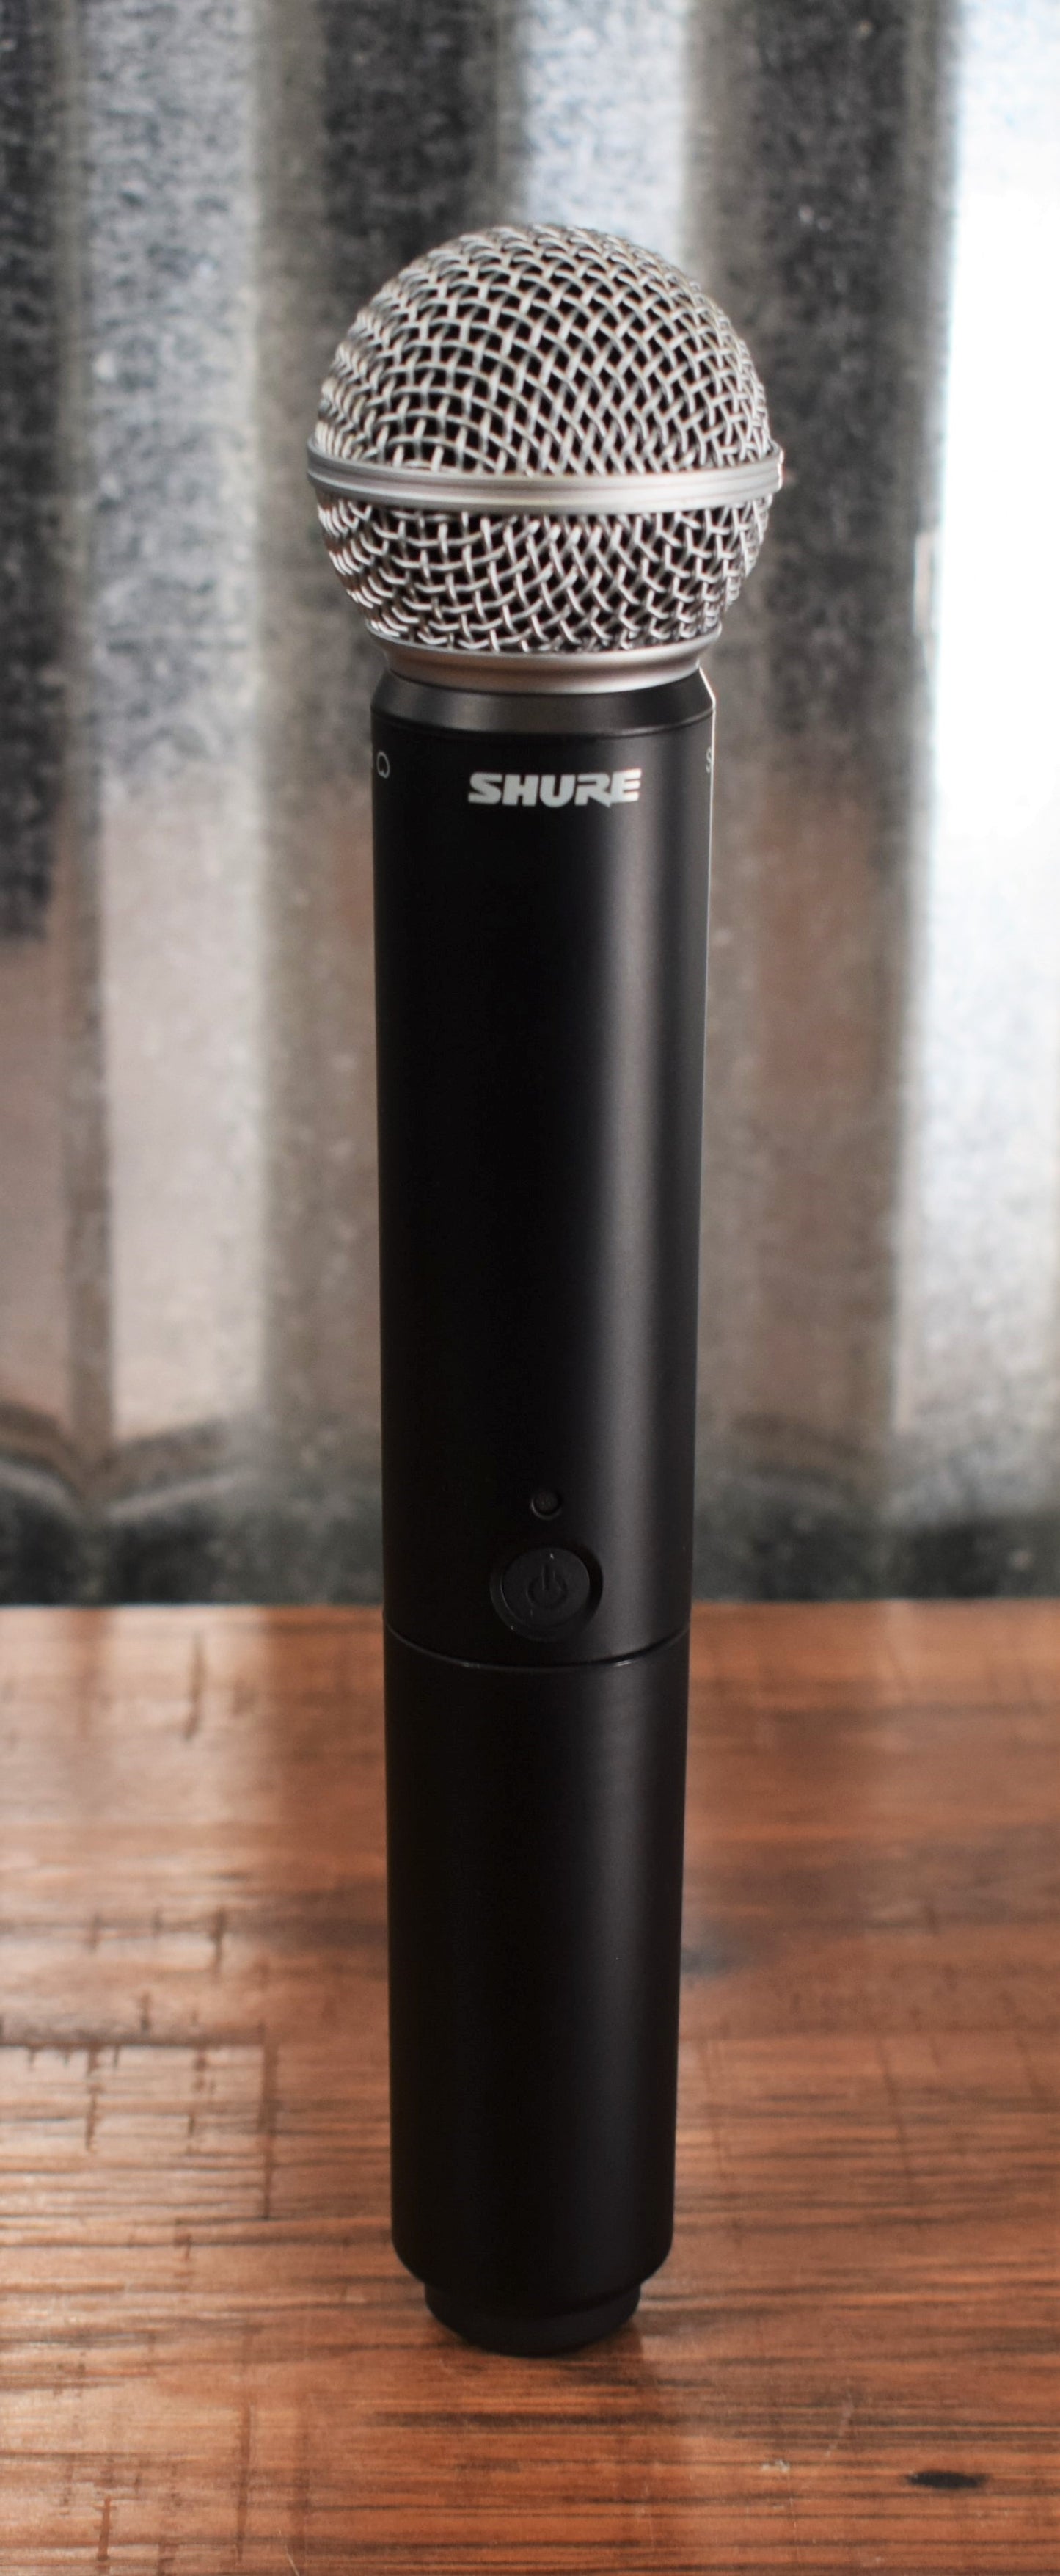 Shure BLX2-SM58-H9 Handheld Microphone Transmitter with SM58 Capsule Demo